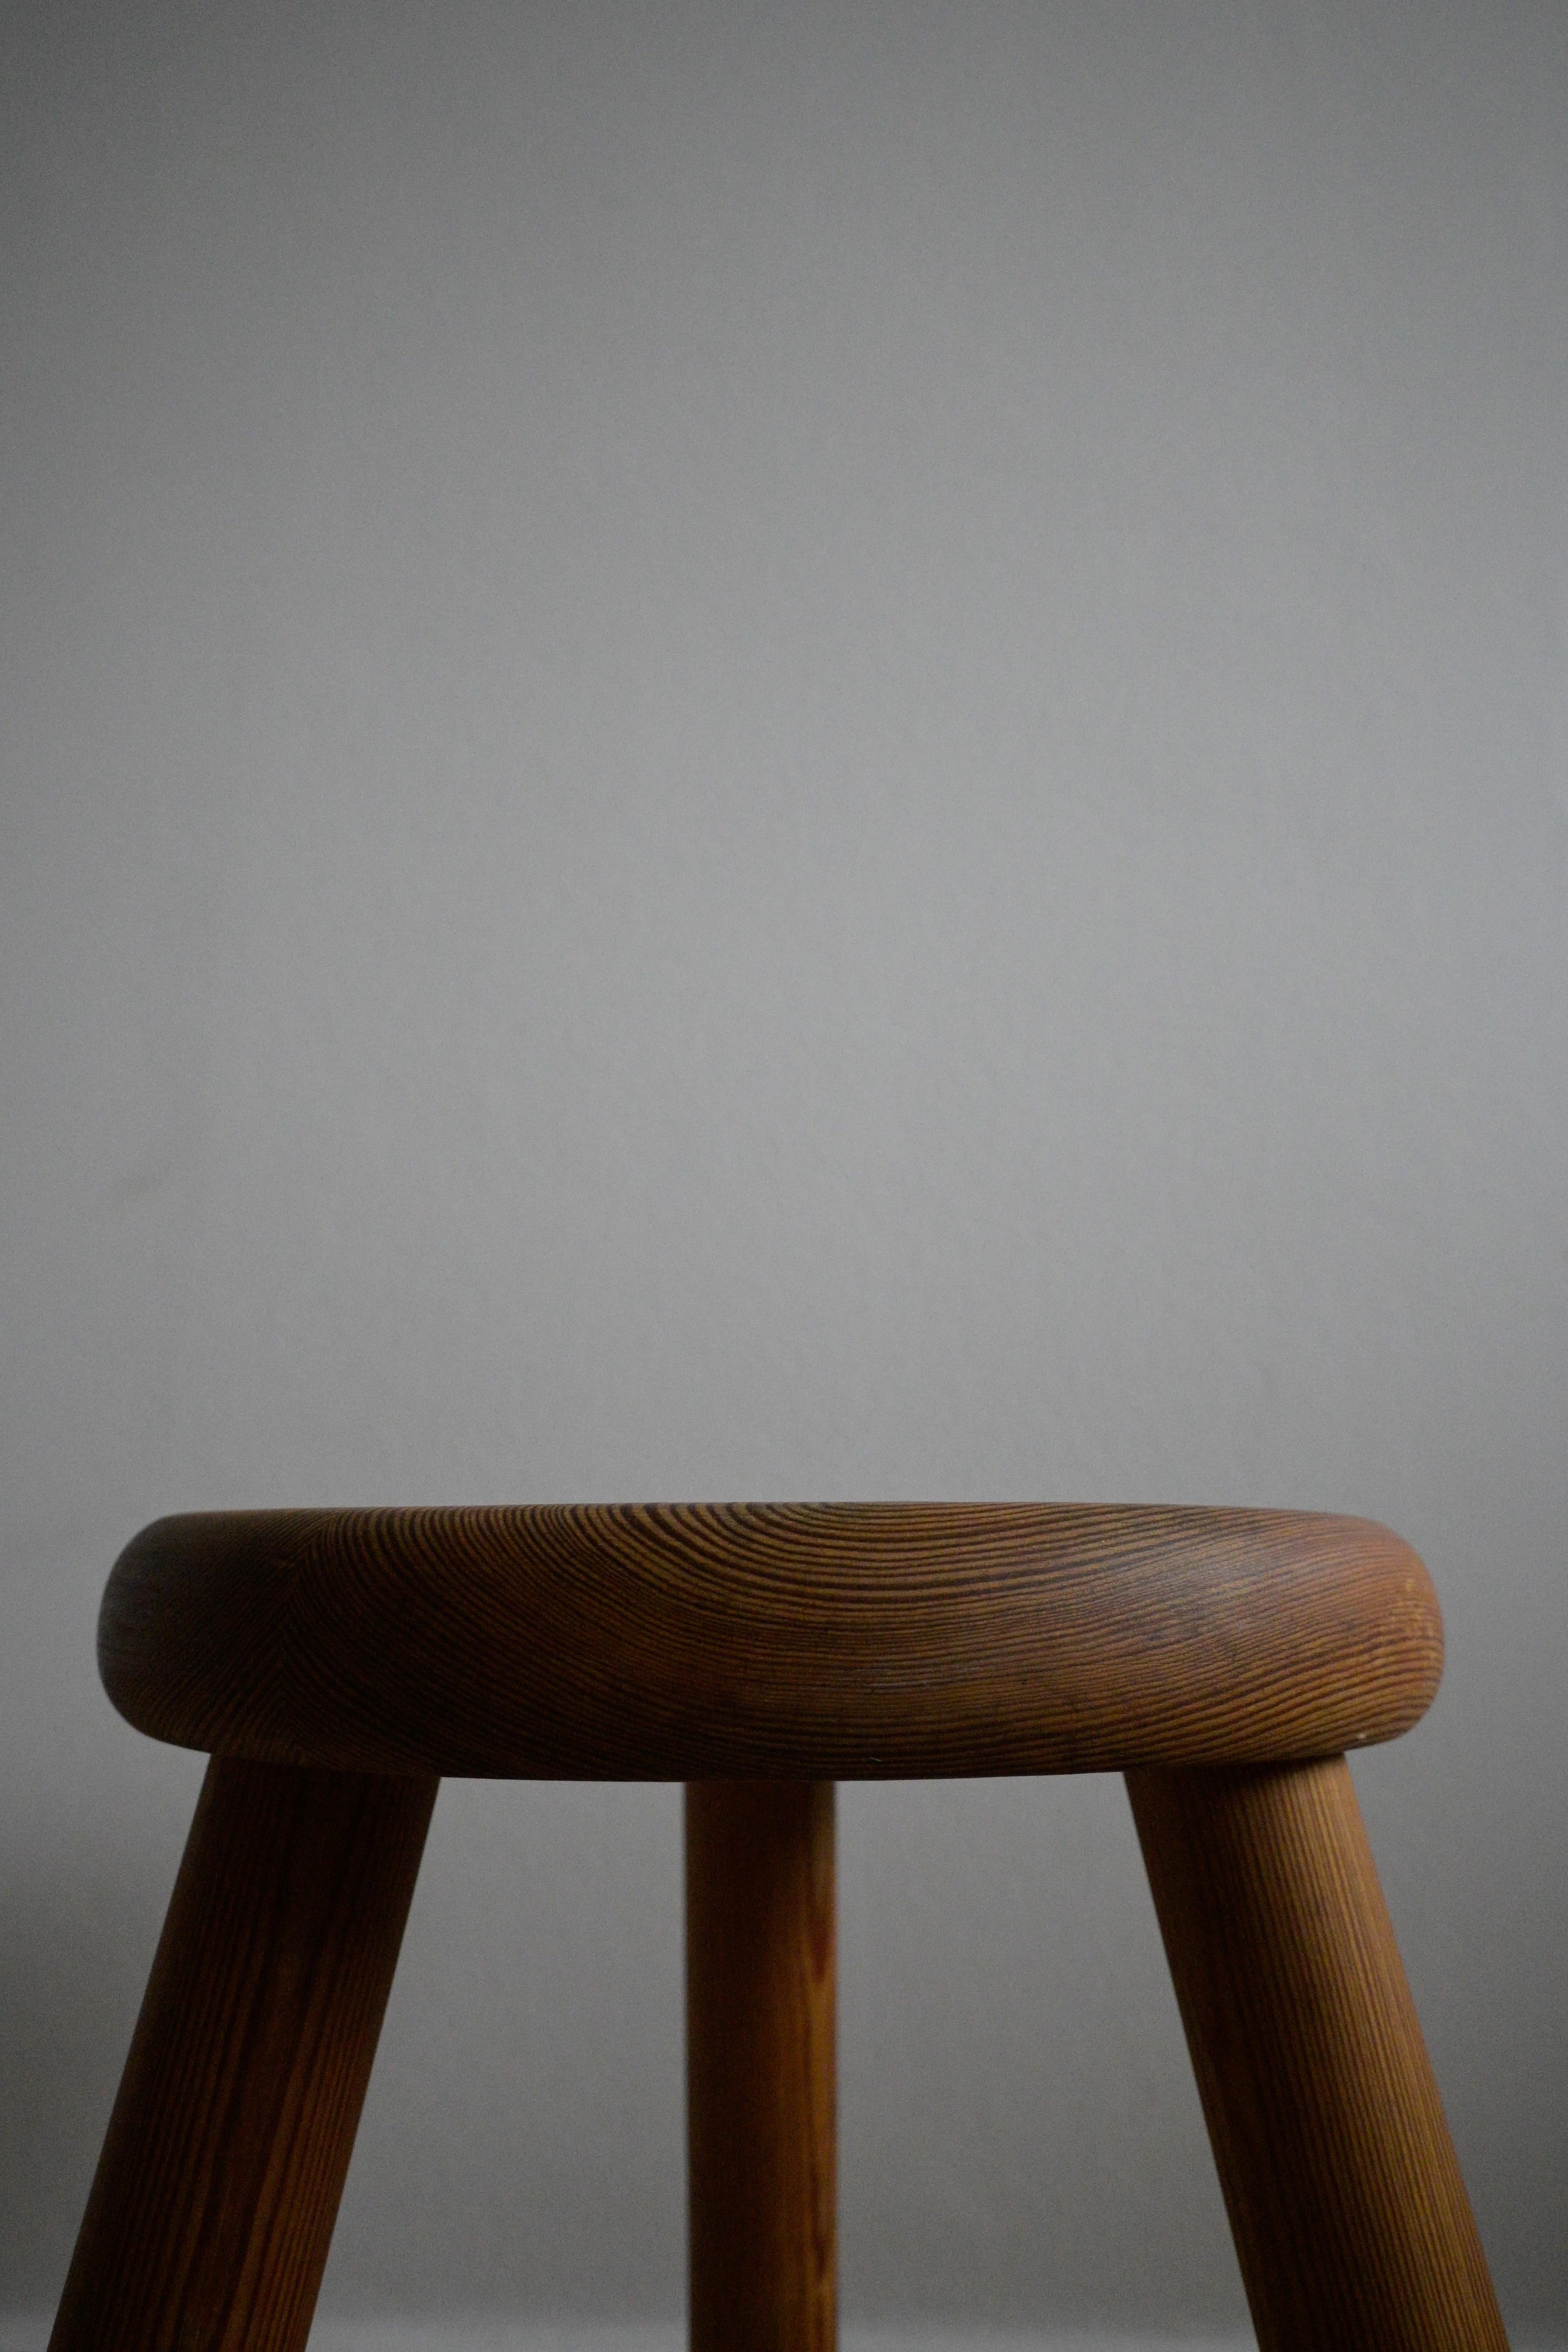 Swedish Pine Stool ca 1960

Consistent with age and use.
Made out of pine wood.

Heigth: 32 cm/12.5 inch
Diameter: 26 cm/10.2 inch